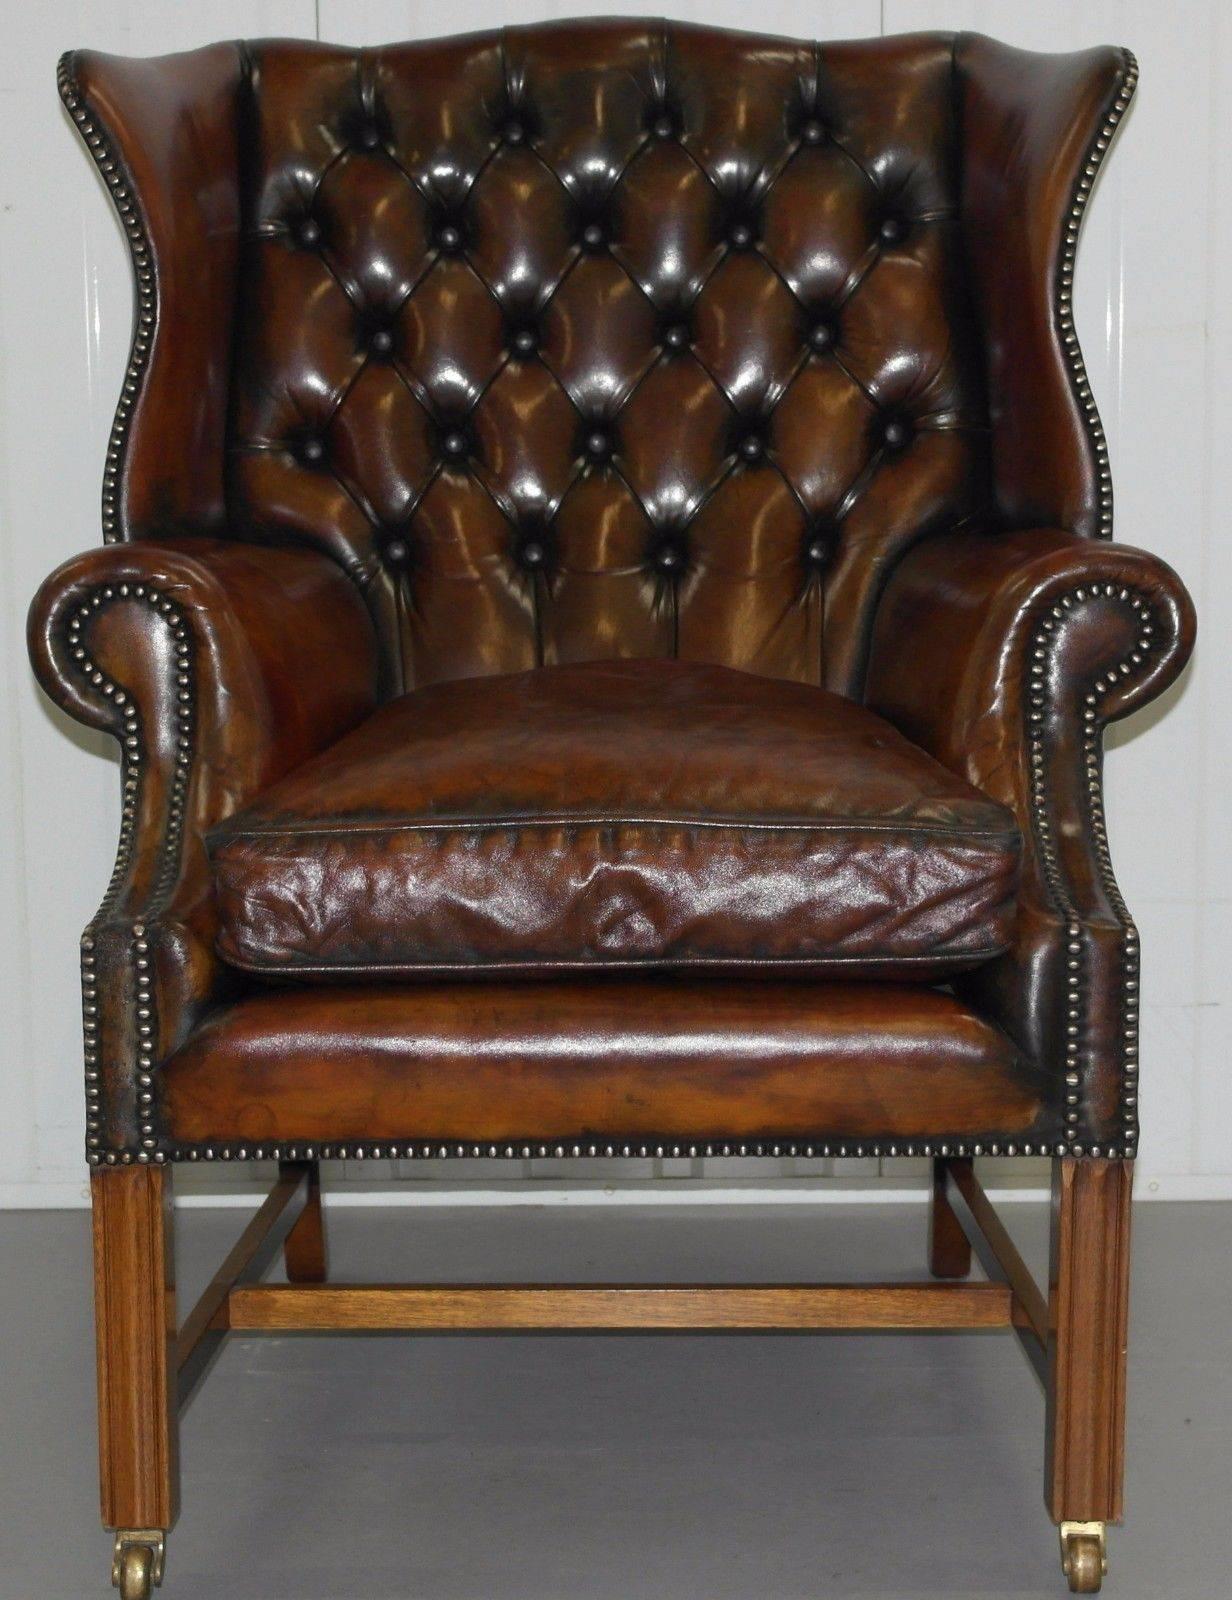 Antique & Vintage furniture Wimbledon 07850 890032

We are delighted to offer for sale this lovely original 1960's hand dyed aged whiskey brown leather fully restored Chesterfield Georgian H Framed wingback armchair with feather filled